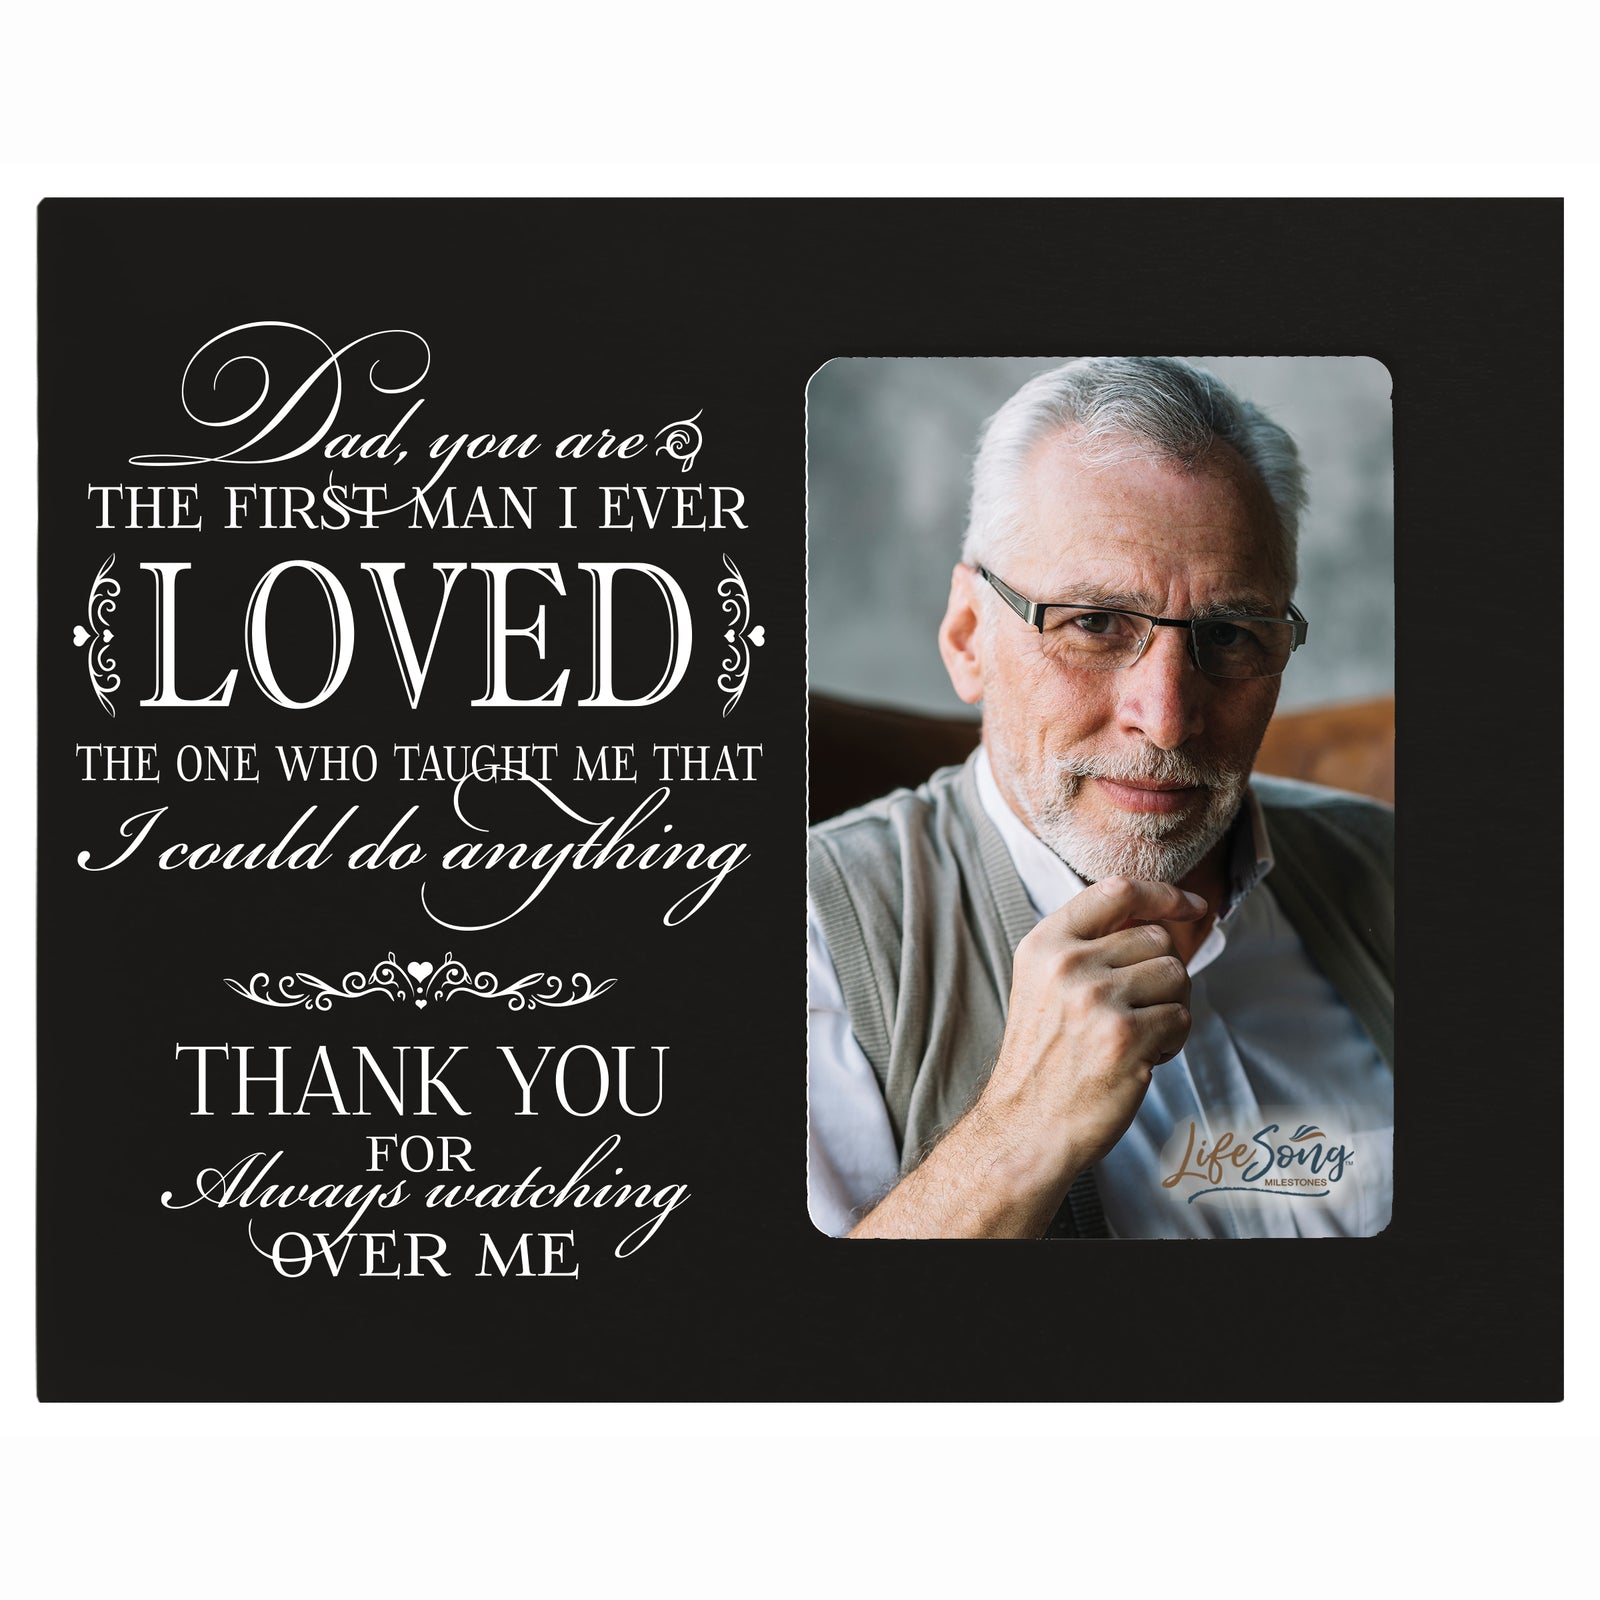 LifeSong Milestones Memorial Picture Frame - Bereavement Sympathy Gift for Loss of Loved One 8”x10” Photo Frame Holds 4”x6” Photo